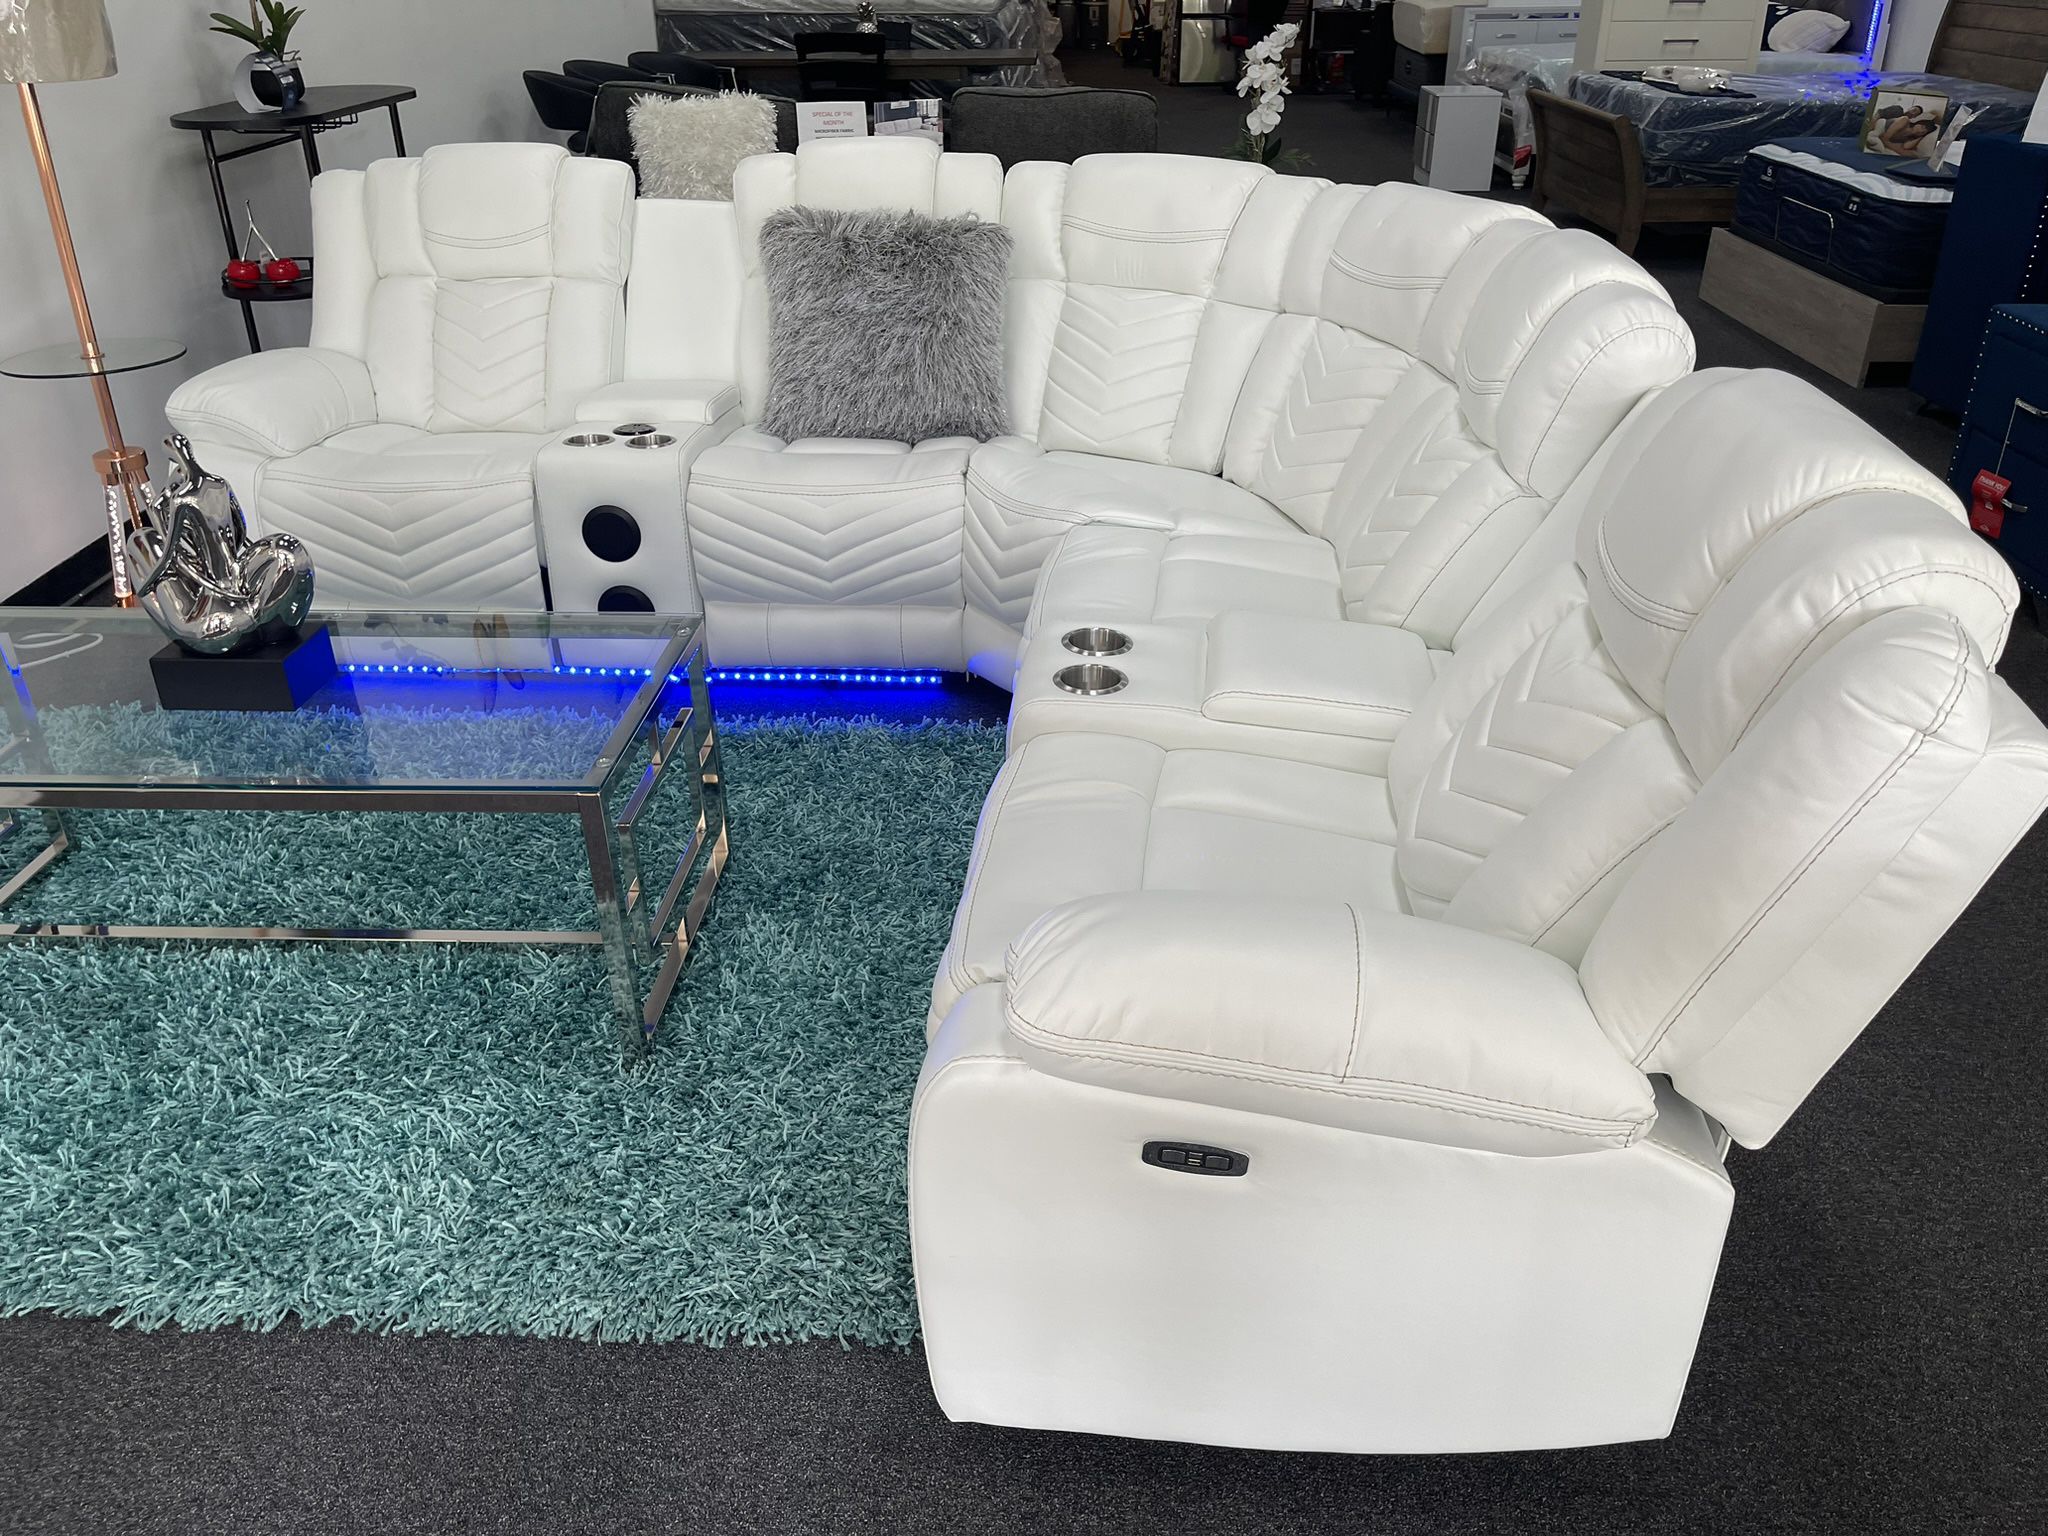 🔥POWER MOTION SECTIONAL WITH BLUETOOTH SPEAKER AVAILABLE IN BLACK OR GREY🔥